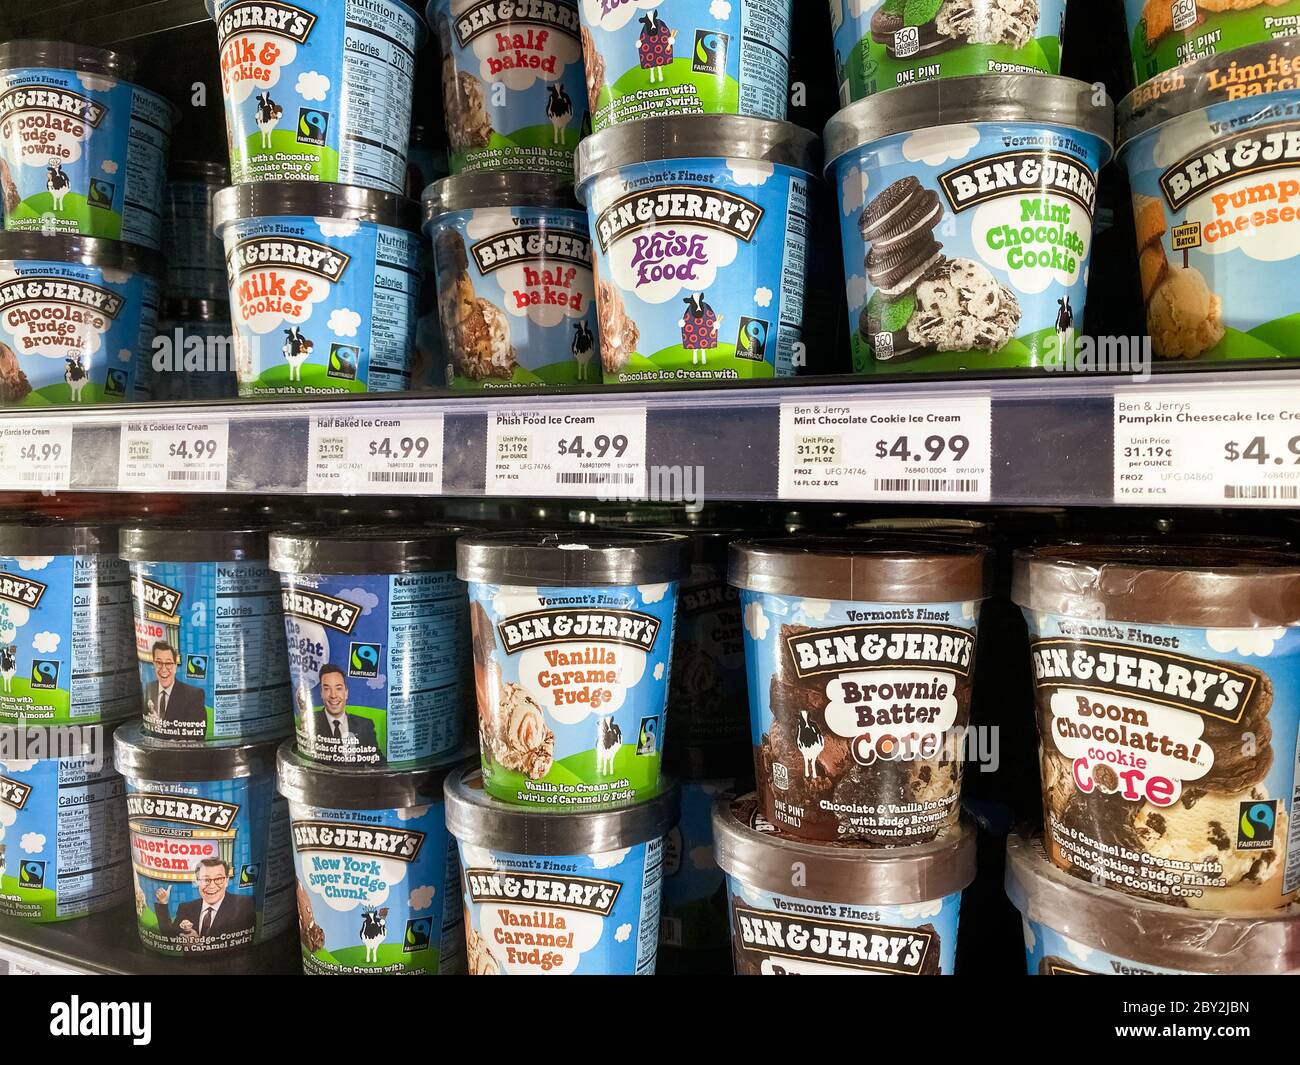 Nov 21, 2019 Santa Clara / CA / USA - Ben & Jerry's ice-cream tubs displayed in a supermarket freezer; Ben & Jerry's Homemade Holdings Inc is a fully Stock Photo